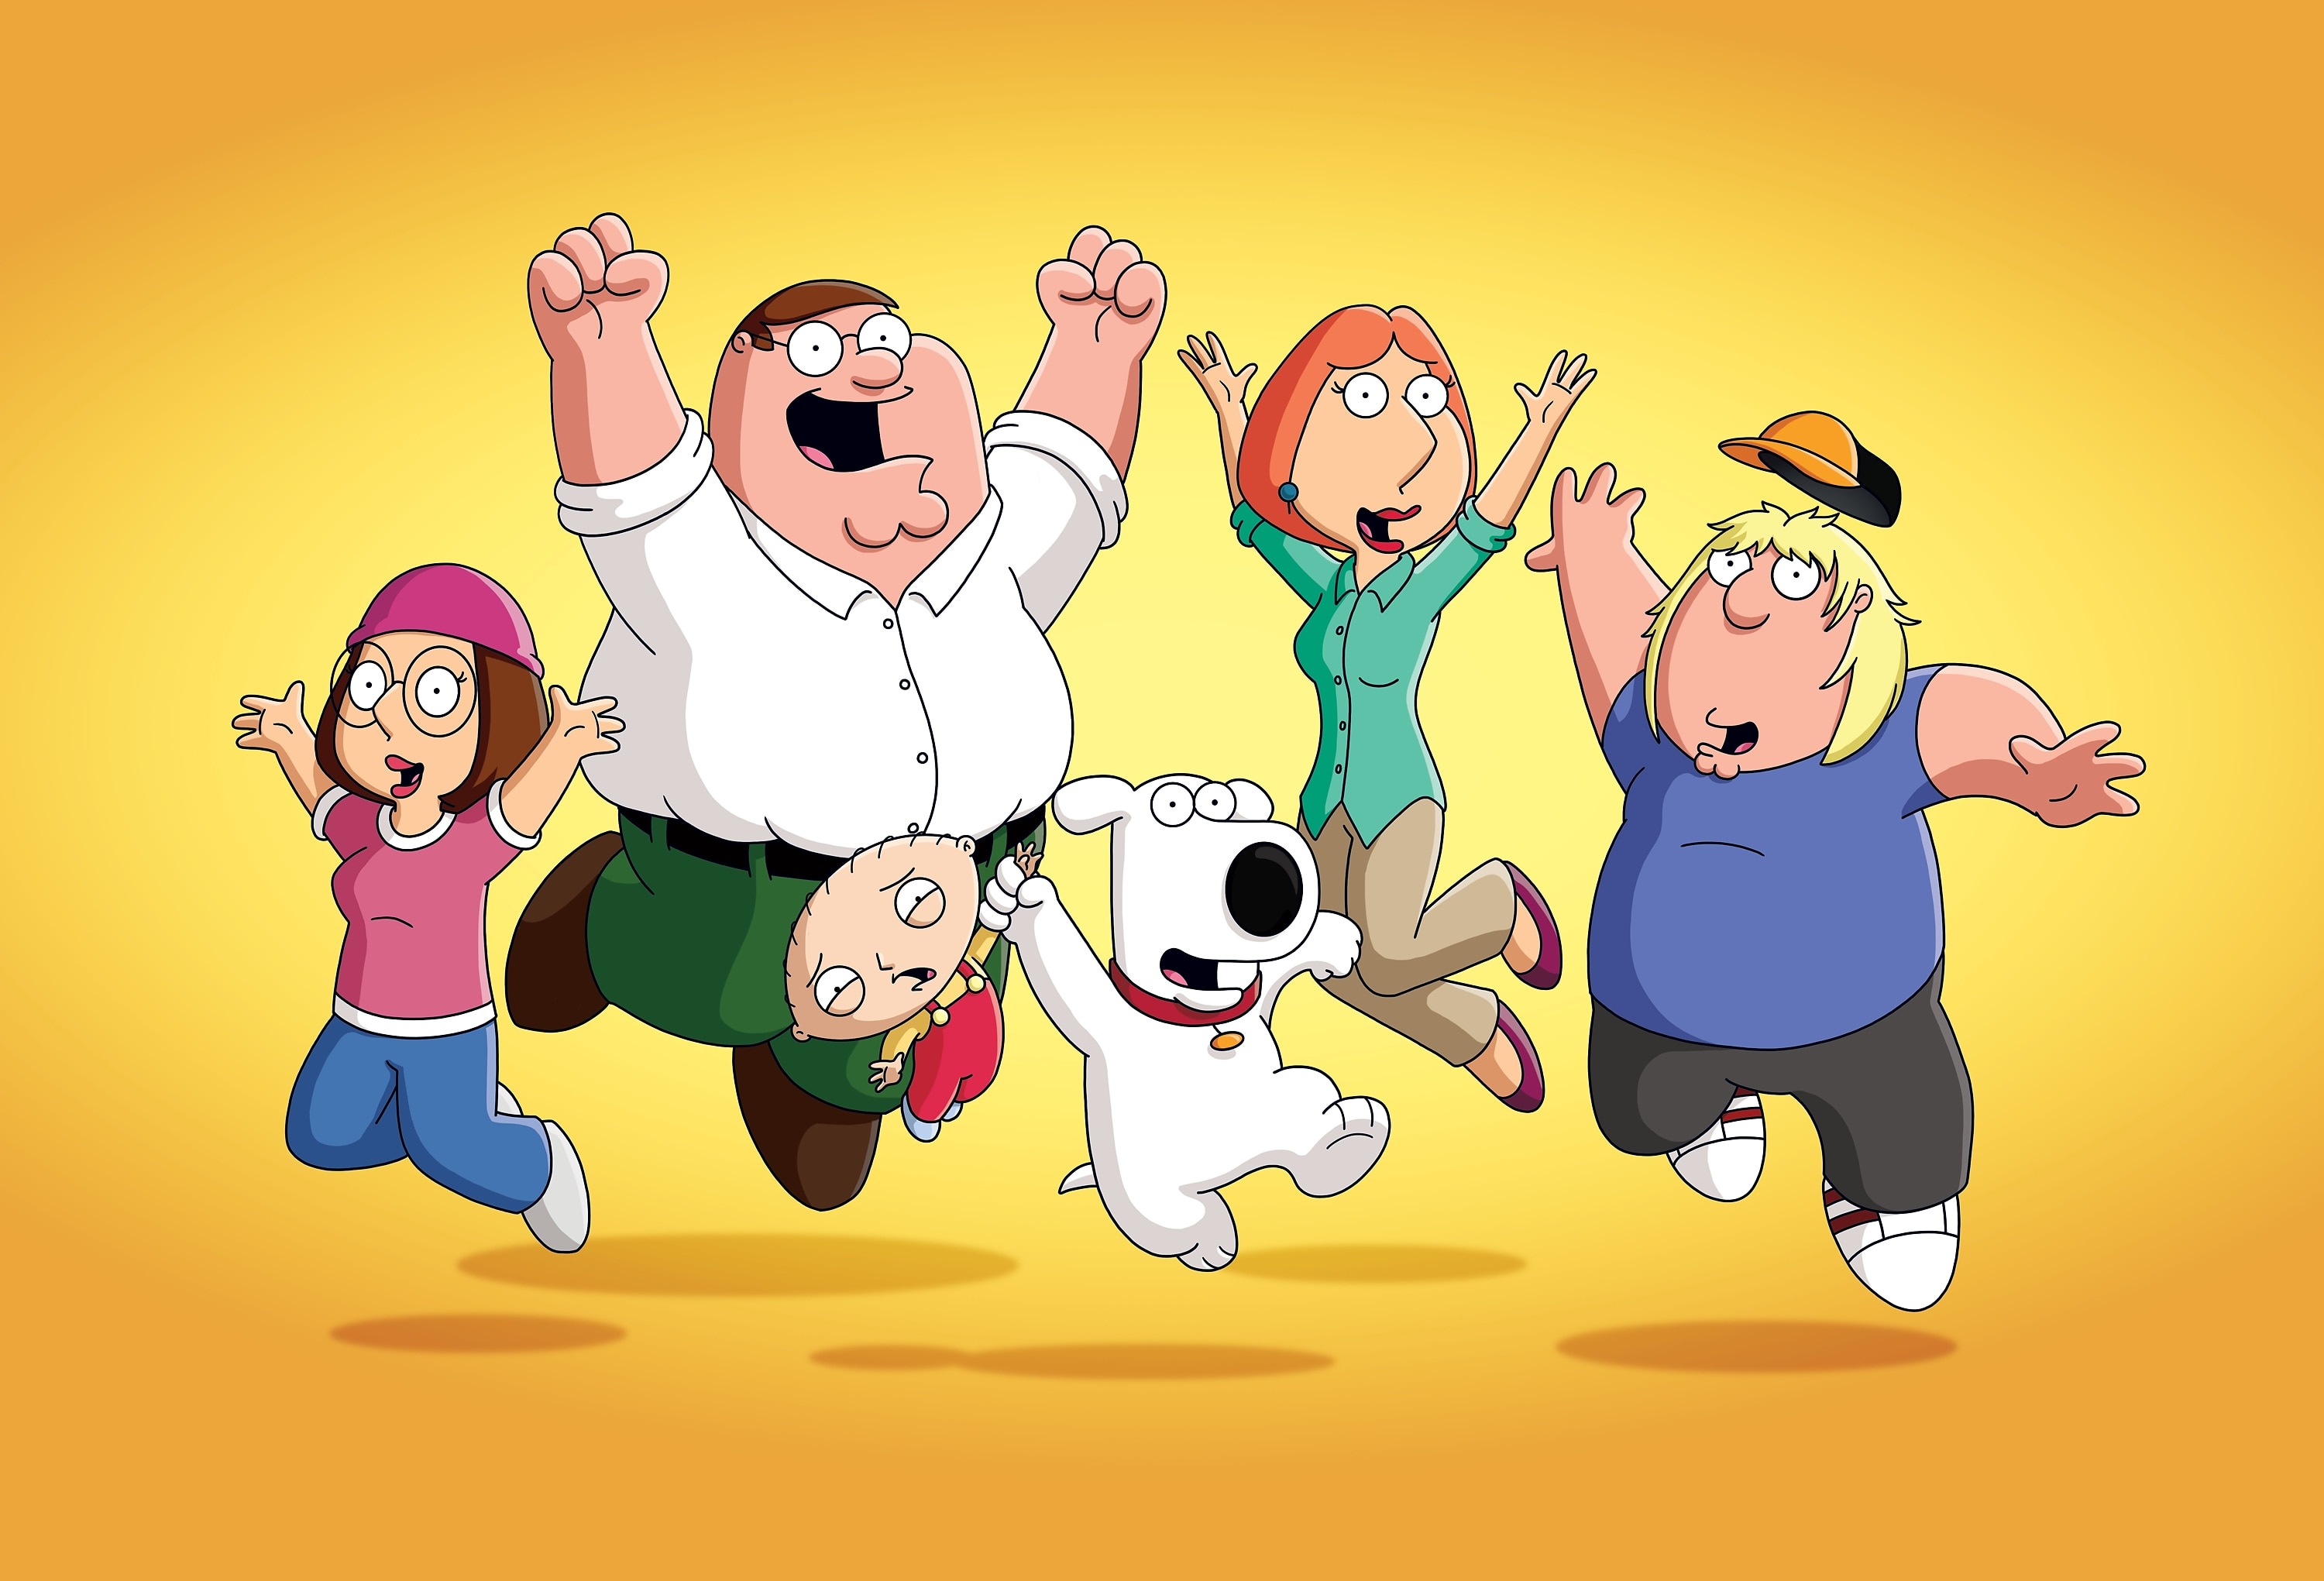 Browser Games - Family Guy Online - Peter Griffin - The Models Resource